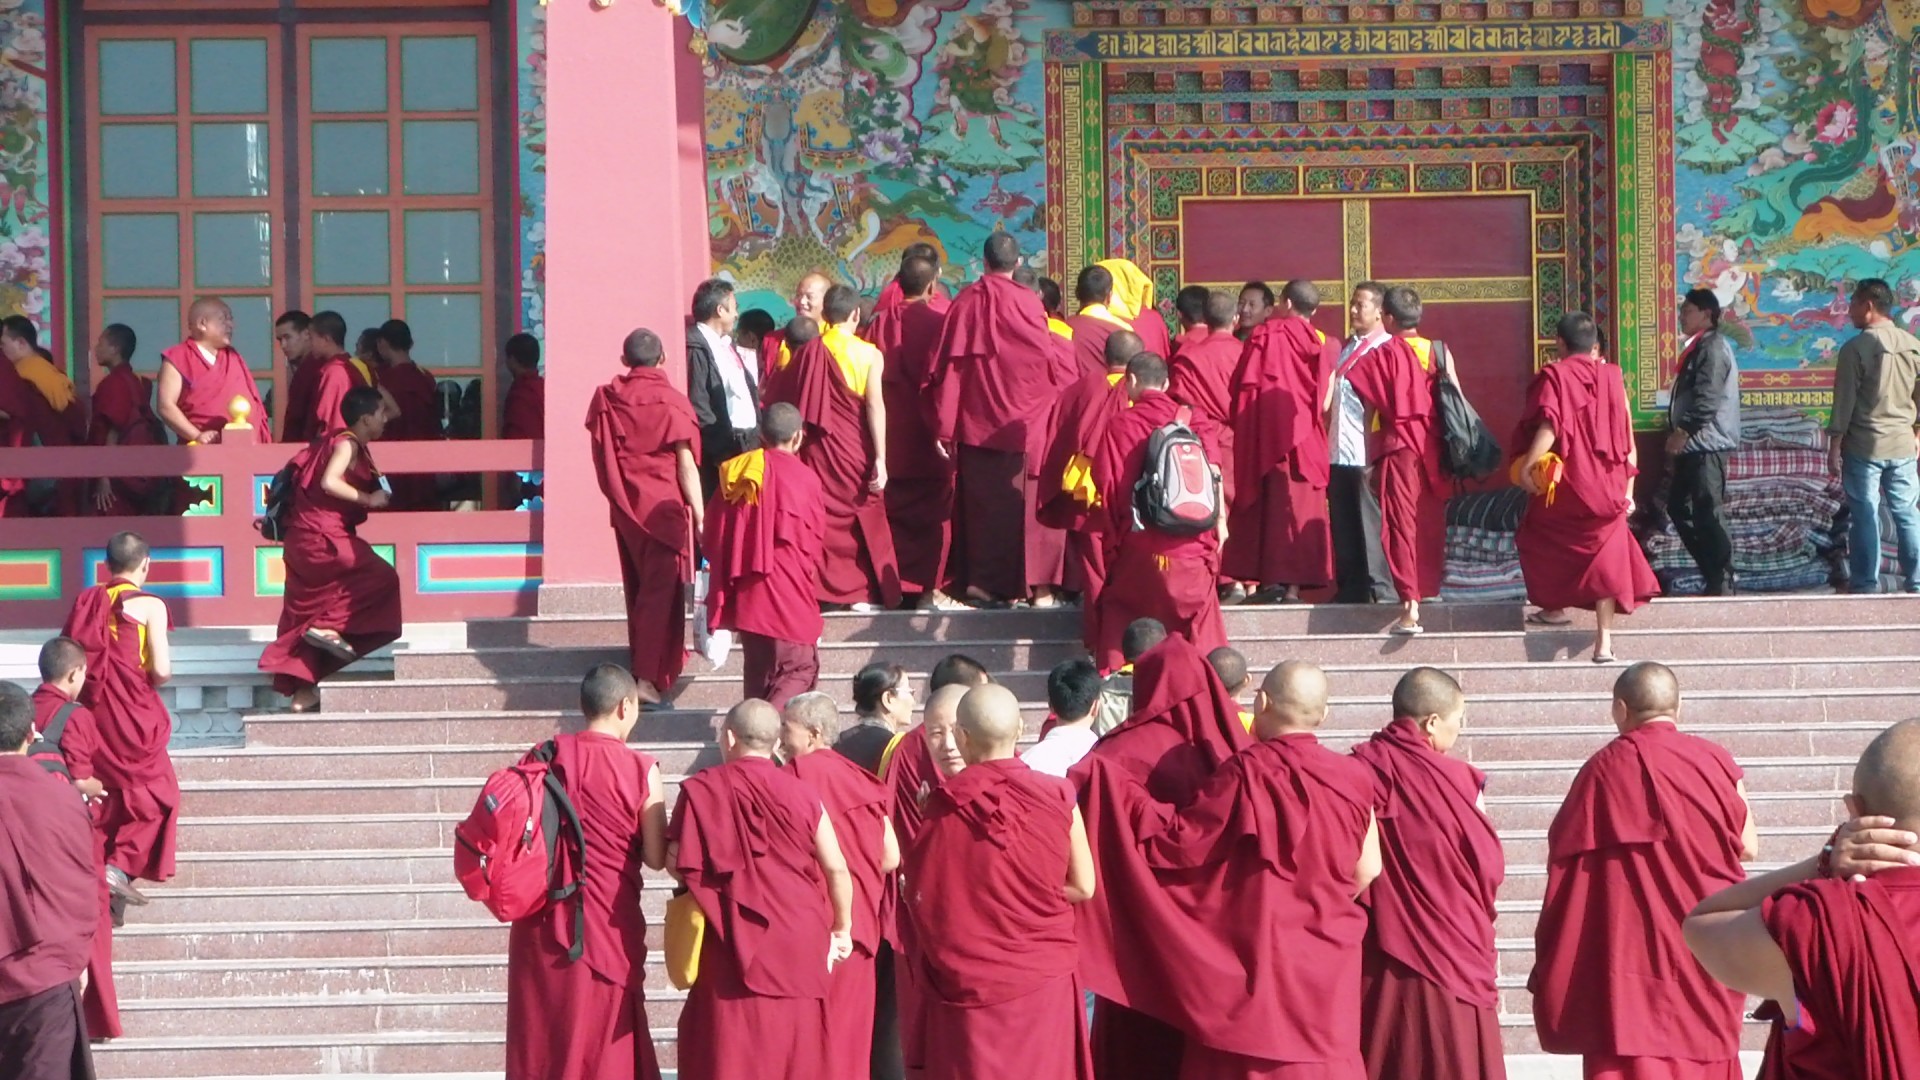 Gathering of Buddhist monks at a monastery. They were gathering for a ceremony to commemorate a Llama who passed away.